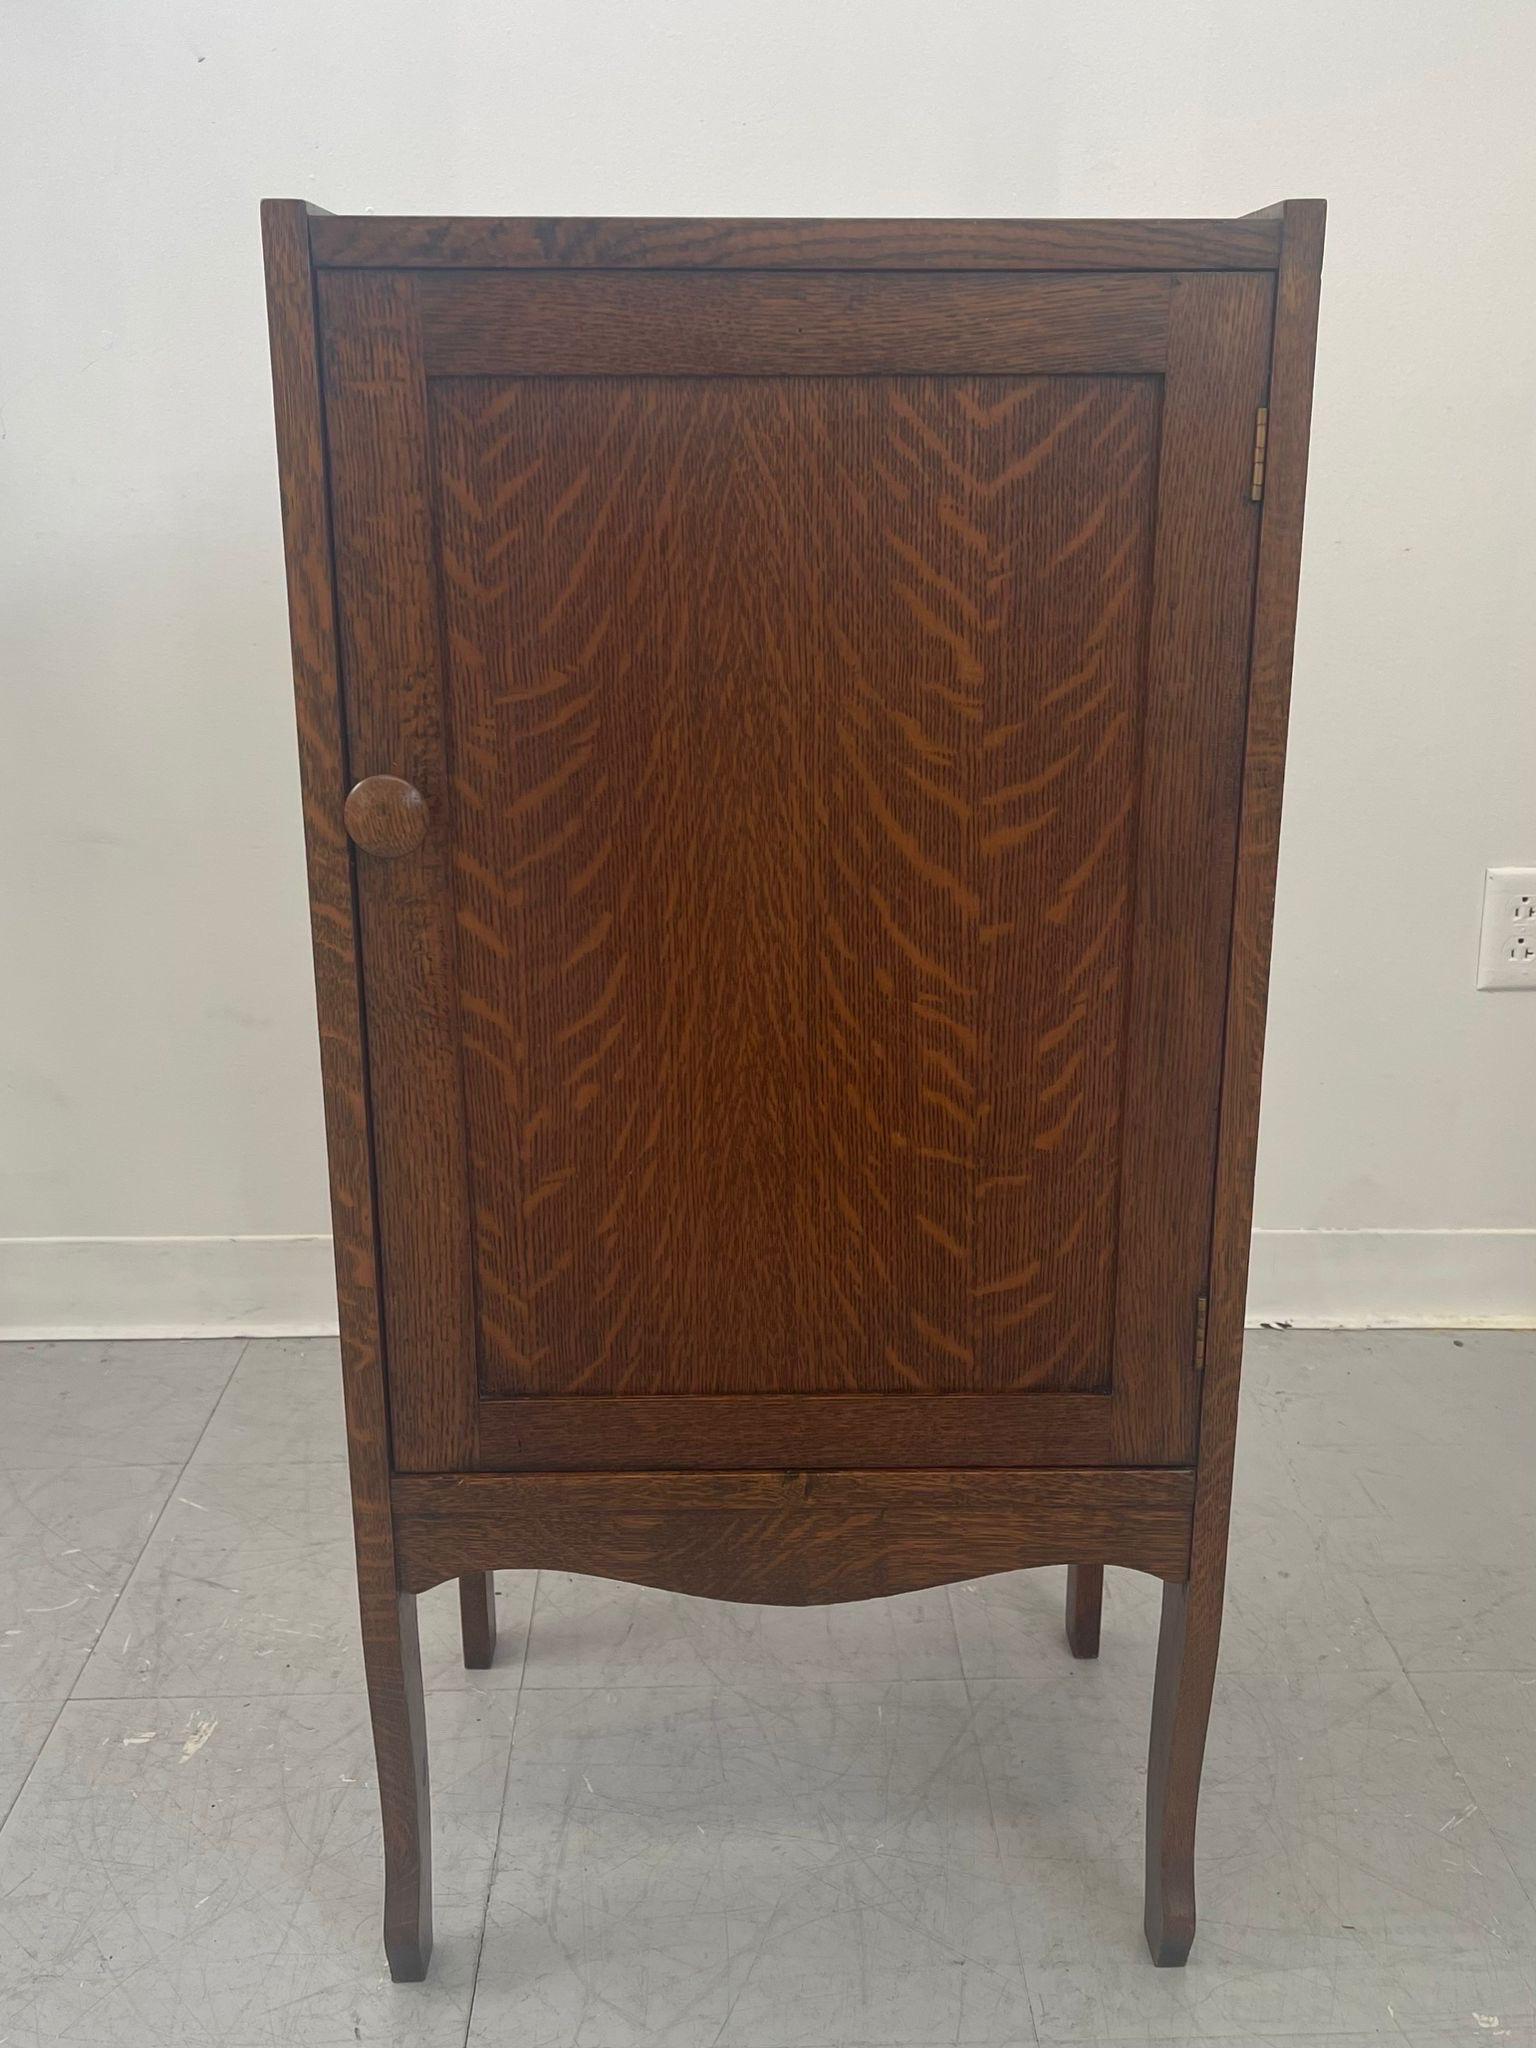 Possibly Tiger Oak, based on Appearance. Cabinet has Several Shelves inside.Wooden Handles. Vintage Condition Consistent with Age as Pictured.

Dimensions. 27 1/2 W ; 14 D ; 37 H